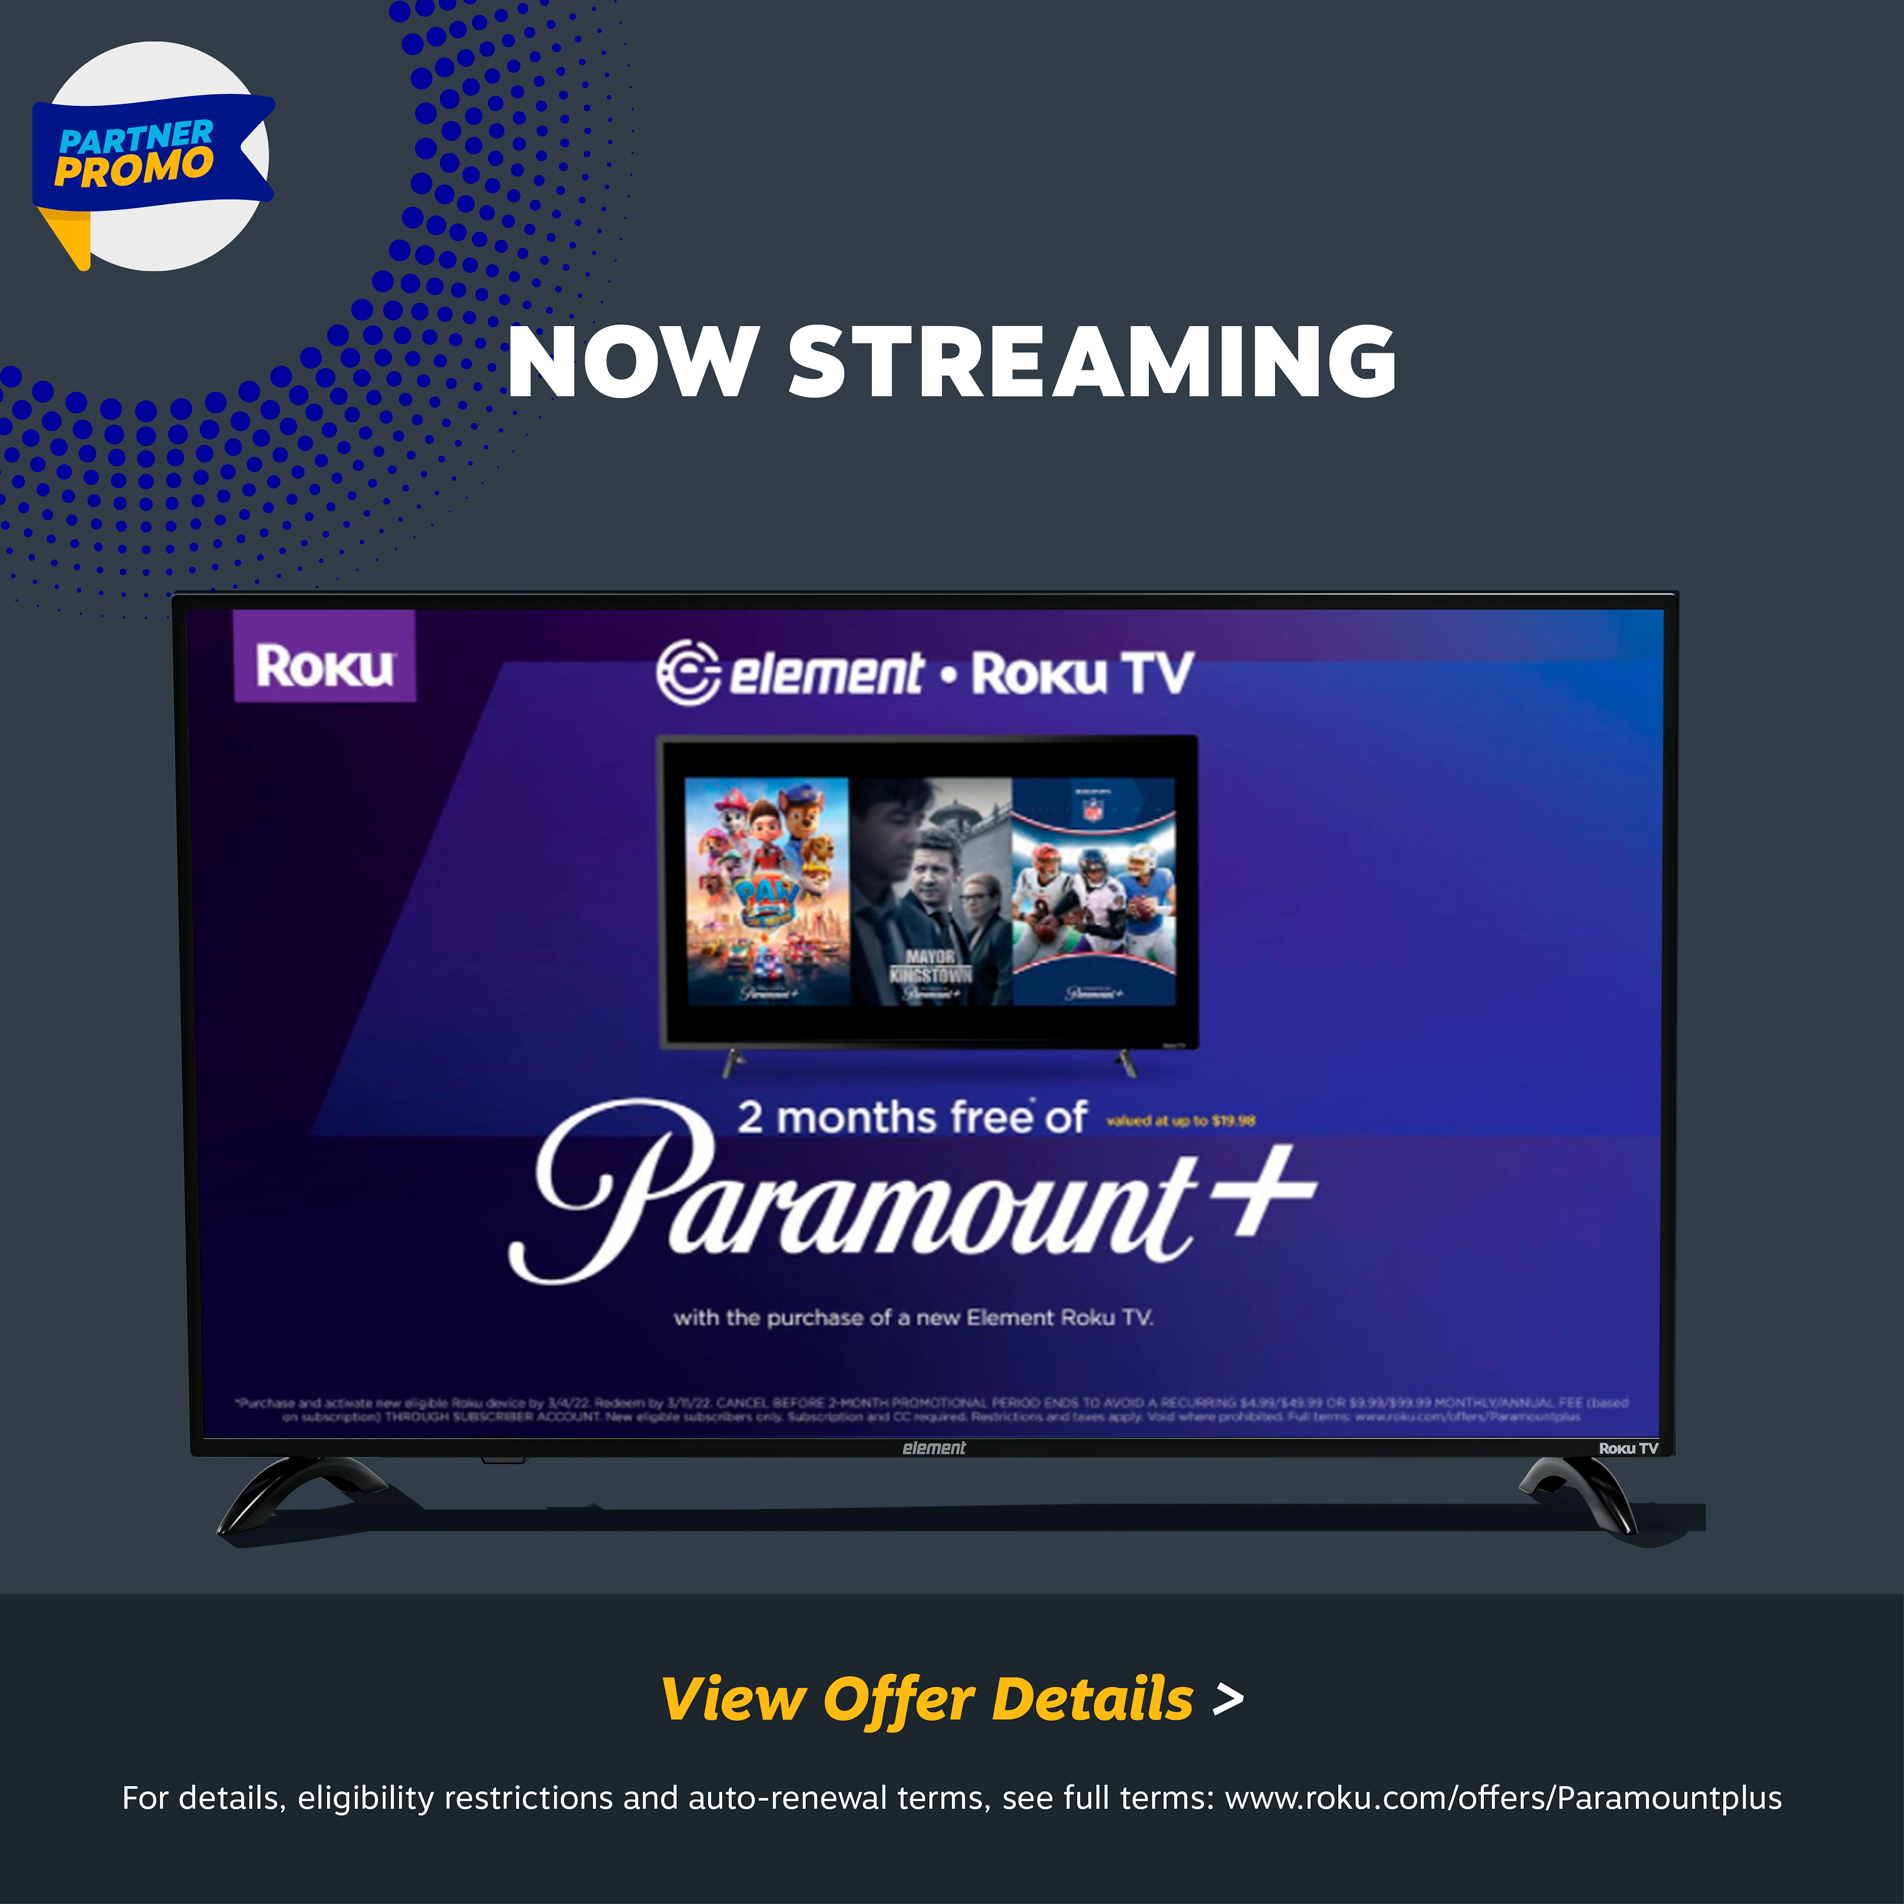 Roku x Paramount+ Promo - receive 2 months free of Paramount+ when you purchase and activate a new Element Roku TV